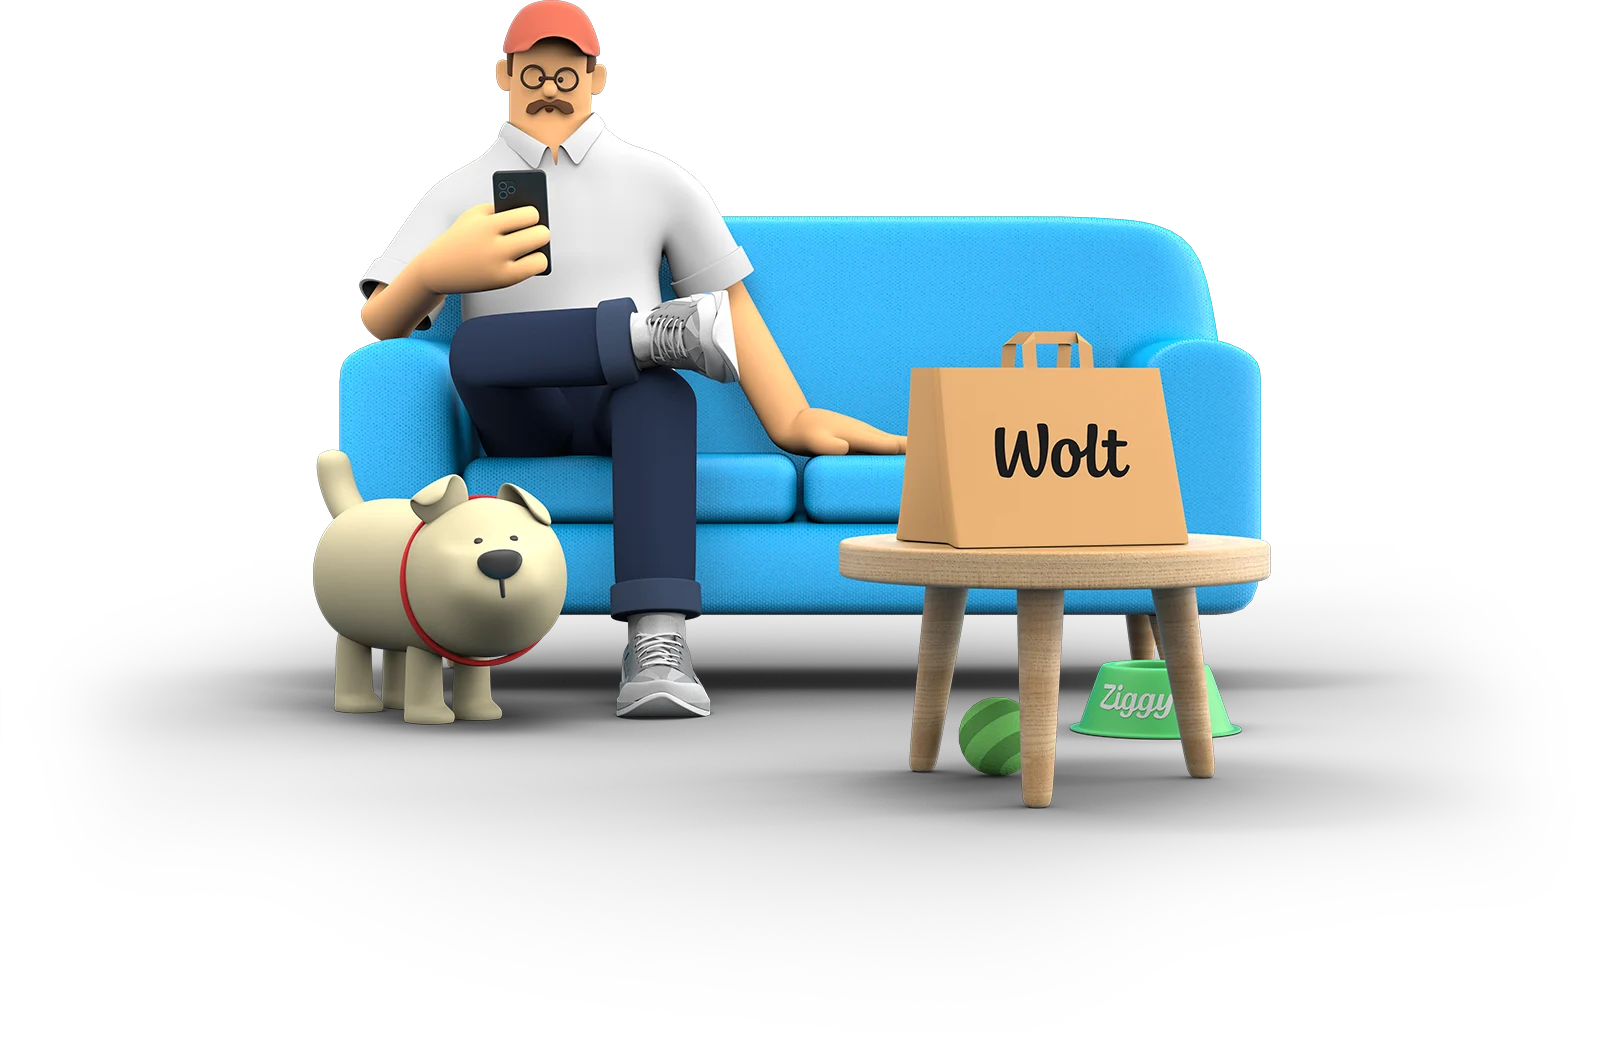 3D man on sofa with Wolt paper bag